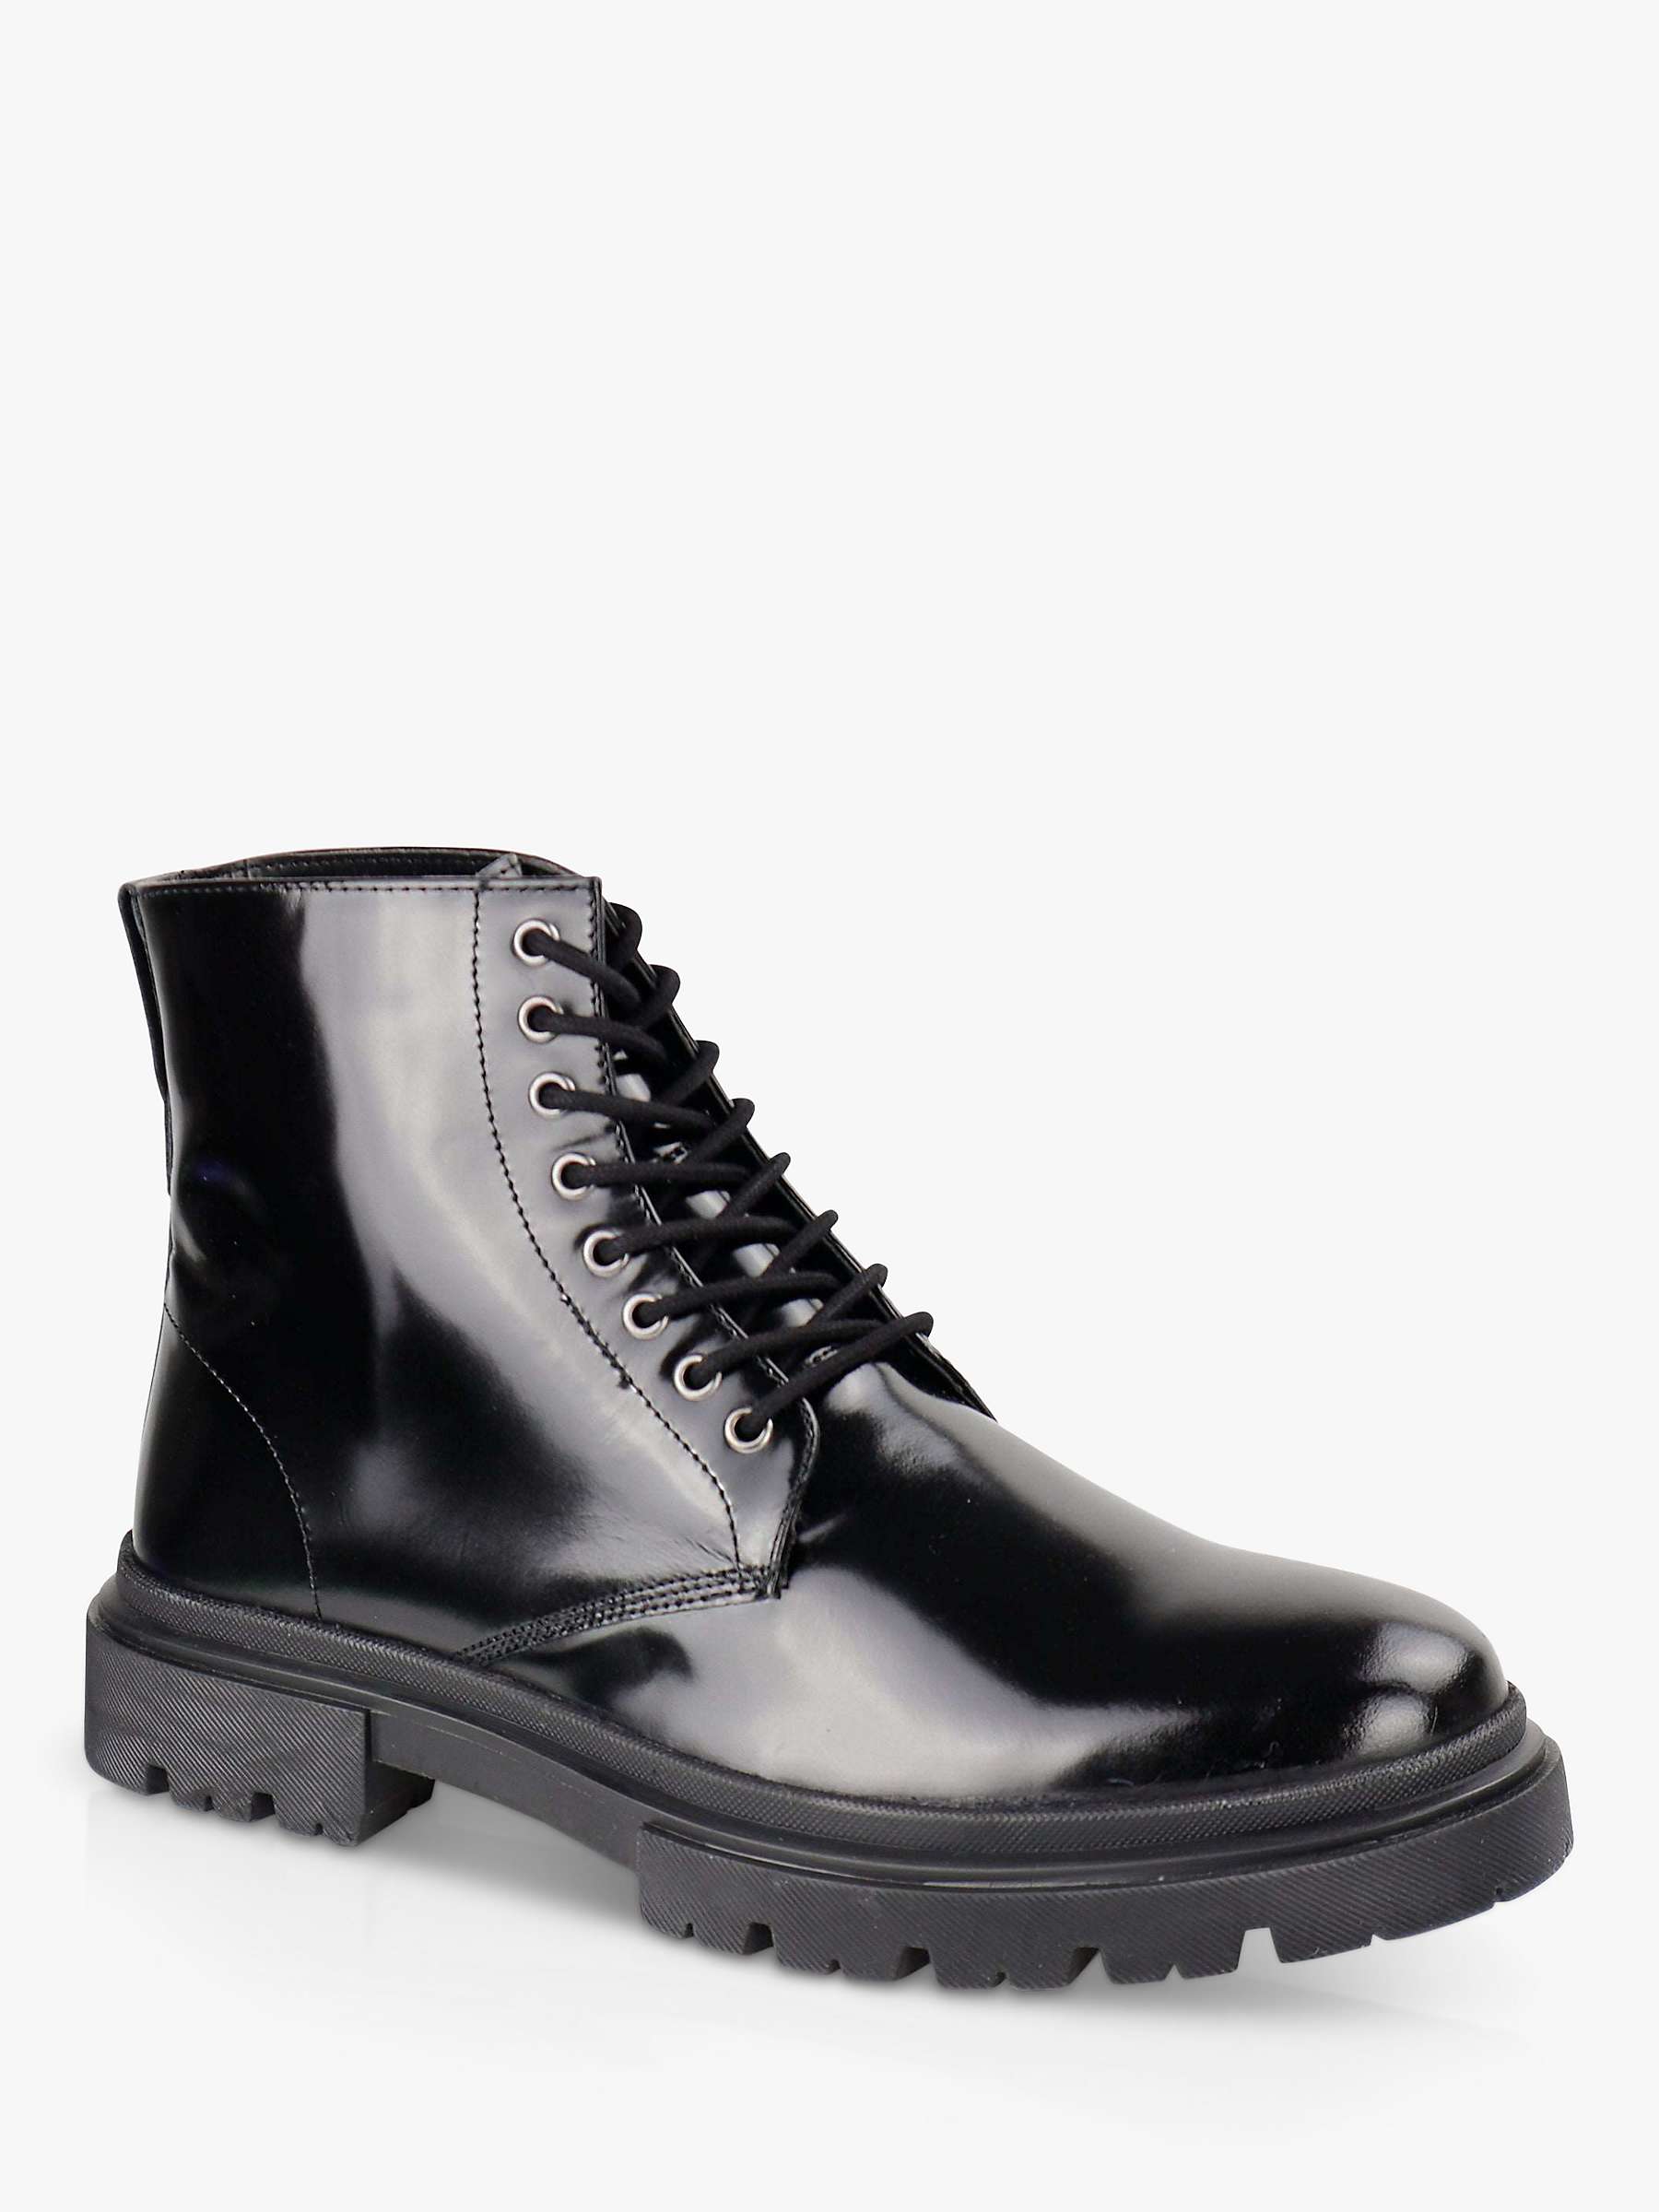 Silver Street London Greenwich Patent Leather Lace Up Ankle Boots ...